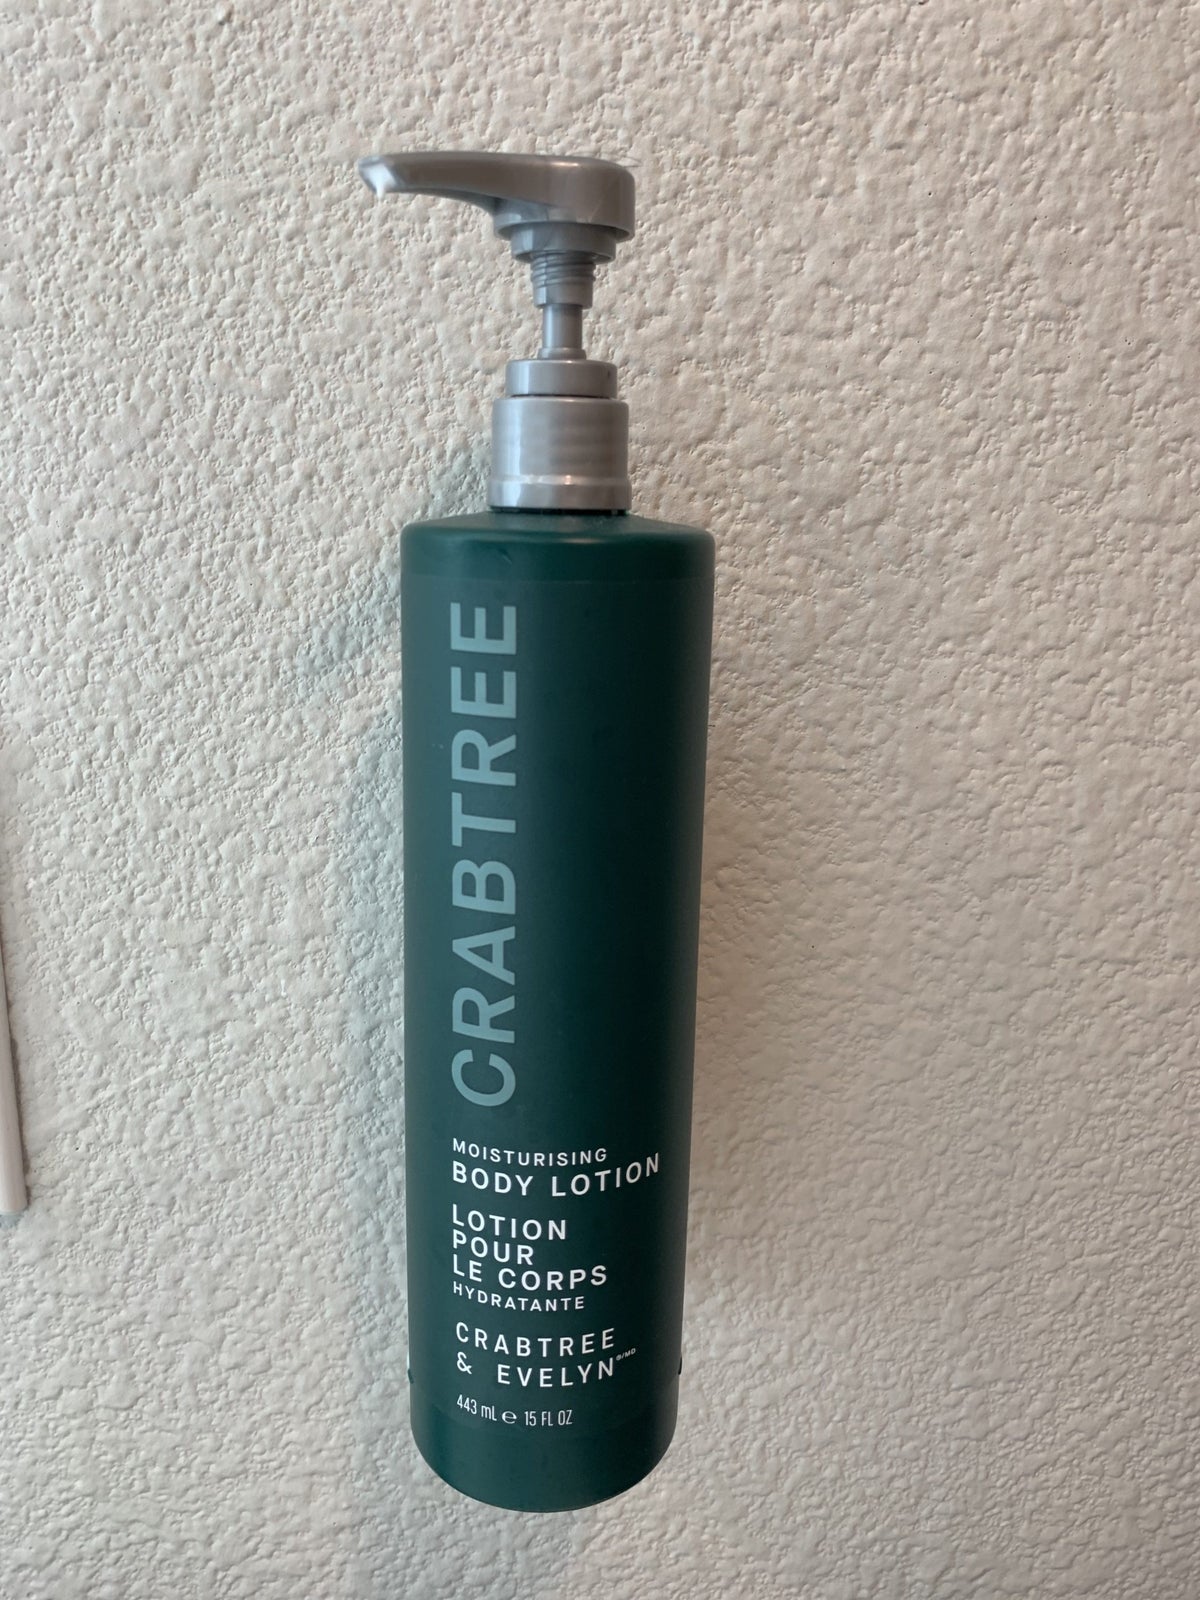 Refillable lotion bottle at the DoubleTree by Hilton Corpus Christi Beachfront